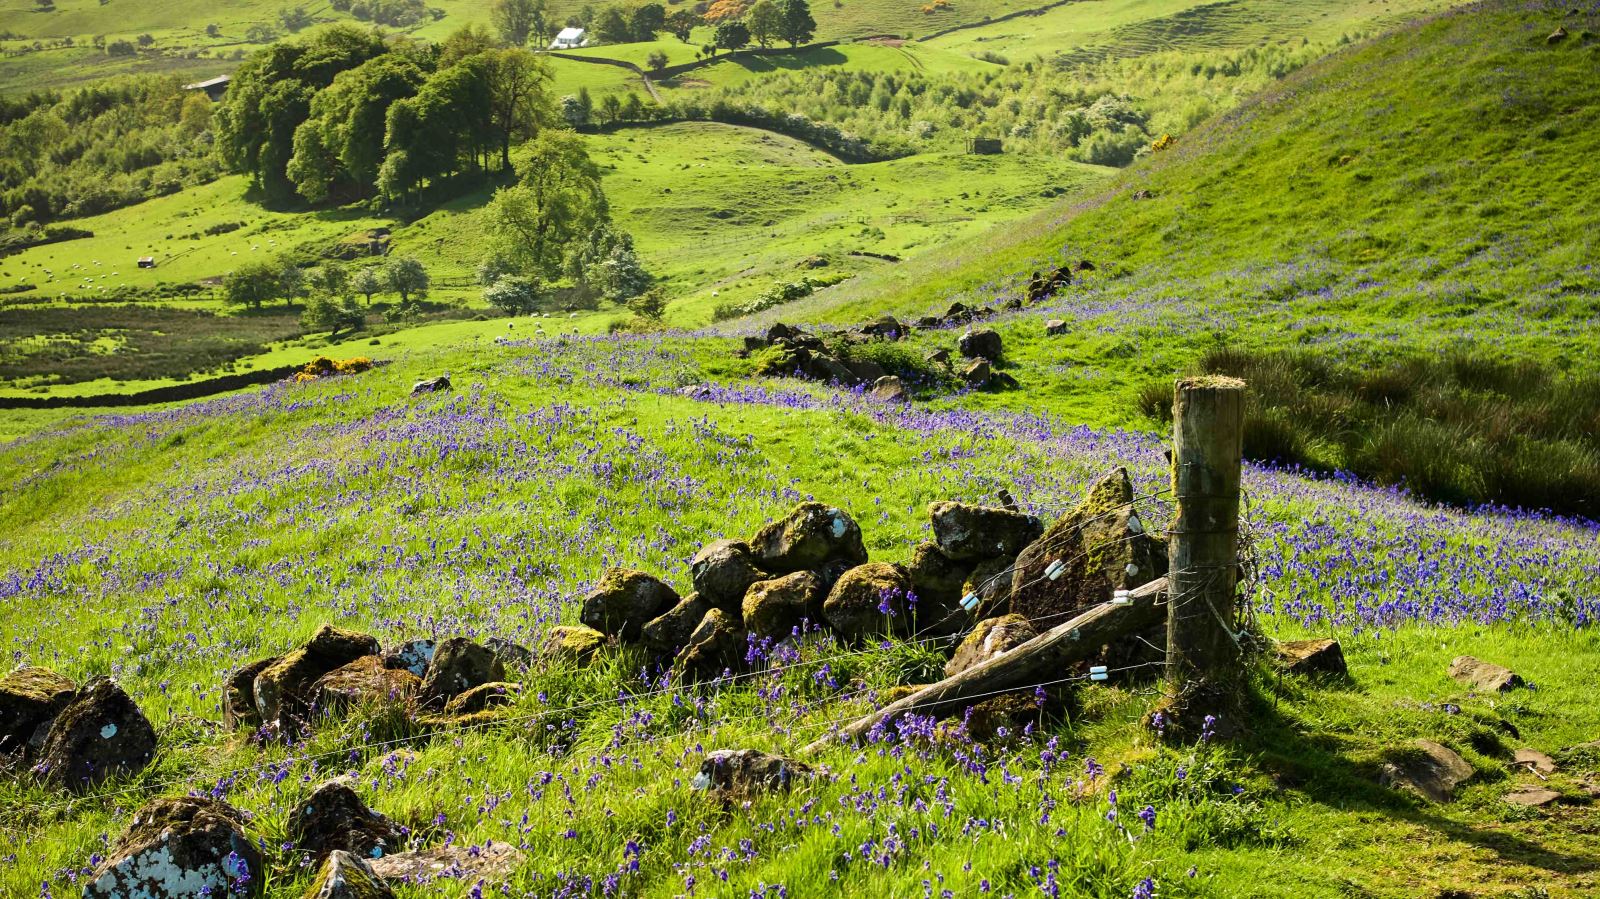 The bluebells in bloom on Sallagh Braes